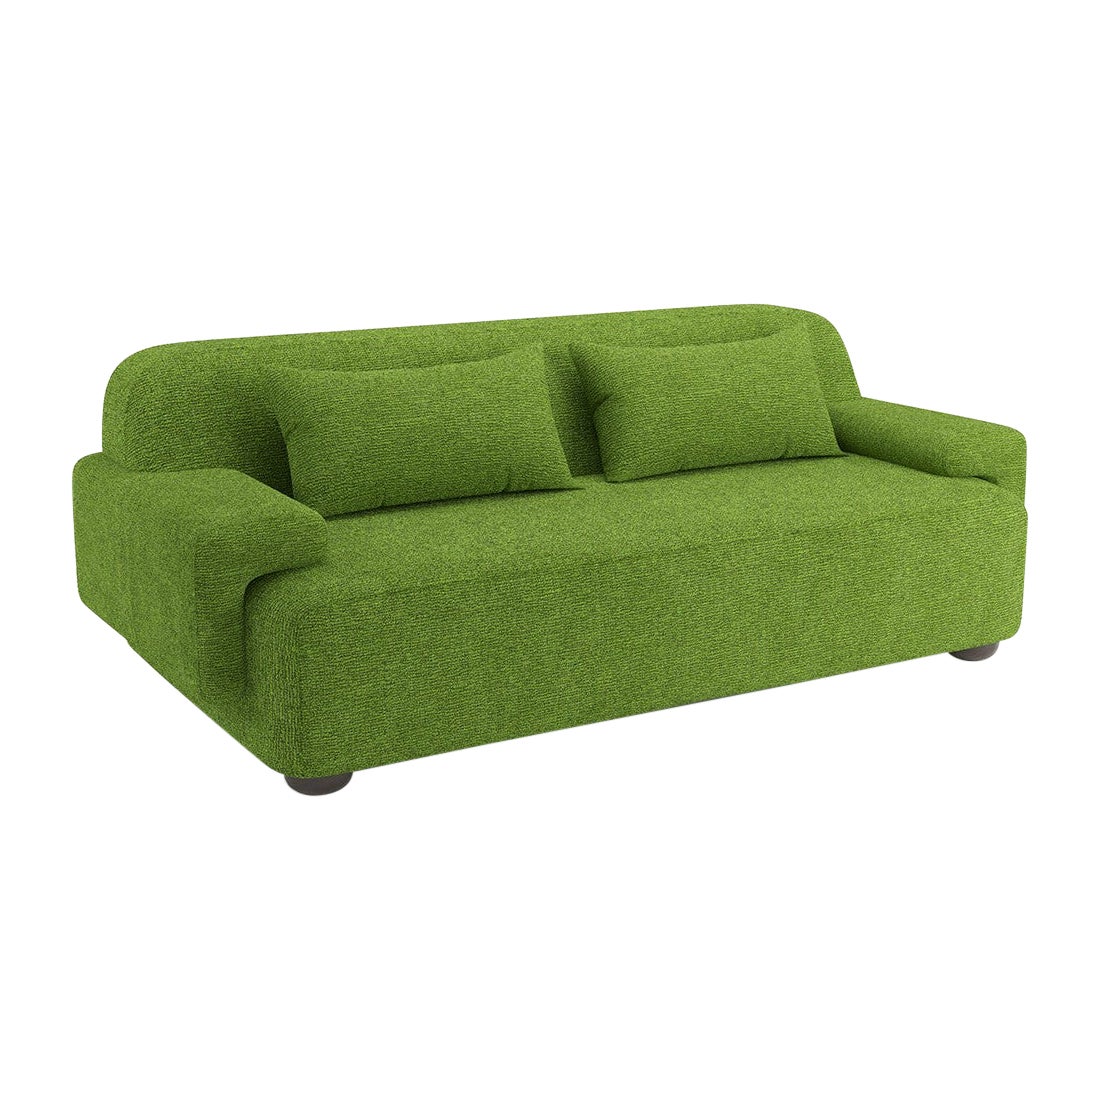 Popus Editions Lena 3 Seater Sofa in Grass Megeve Fabric with Knit Effect